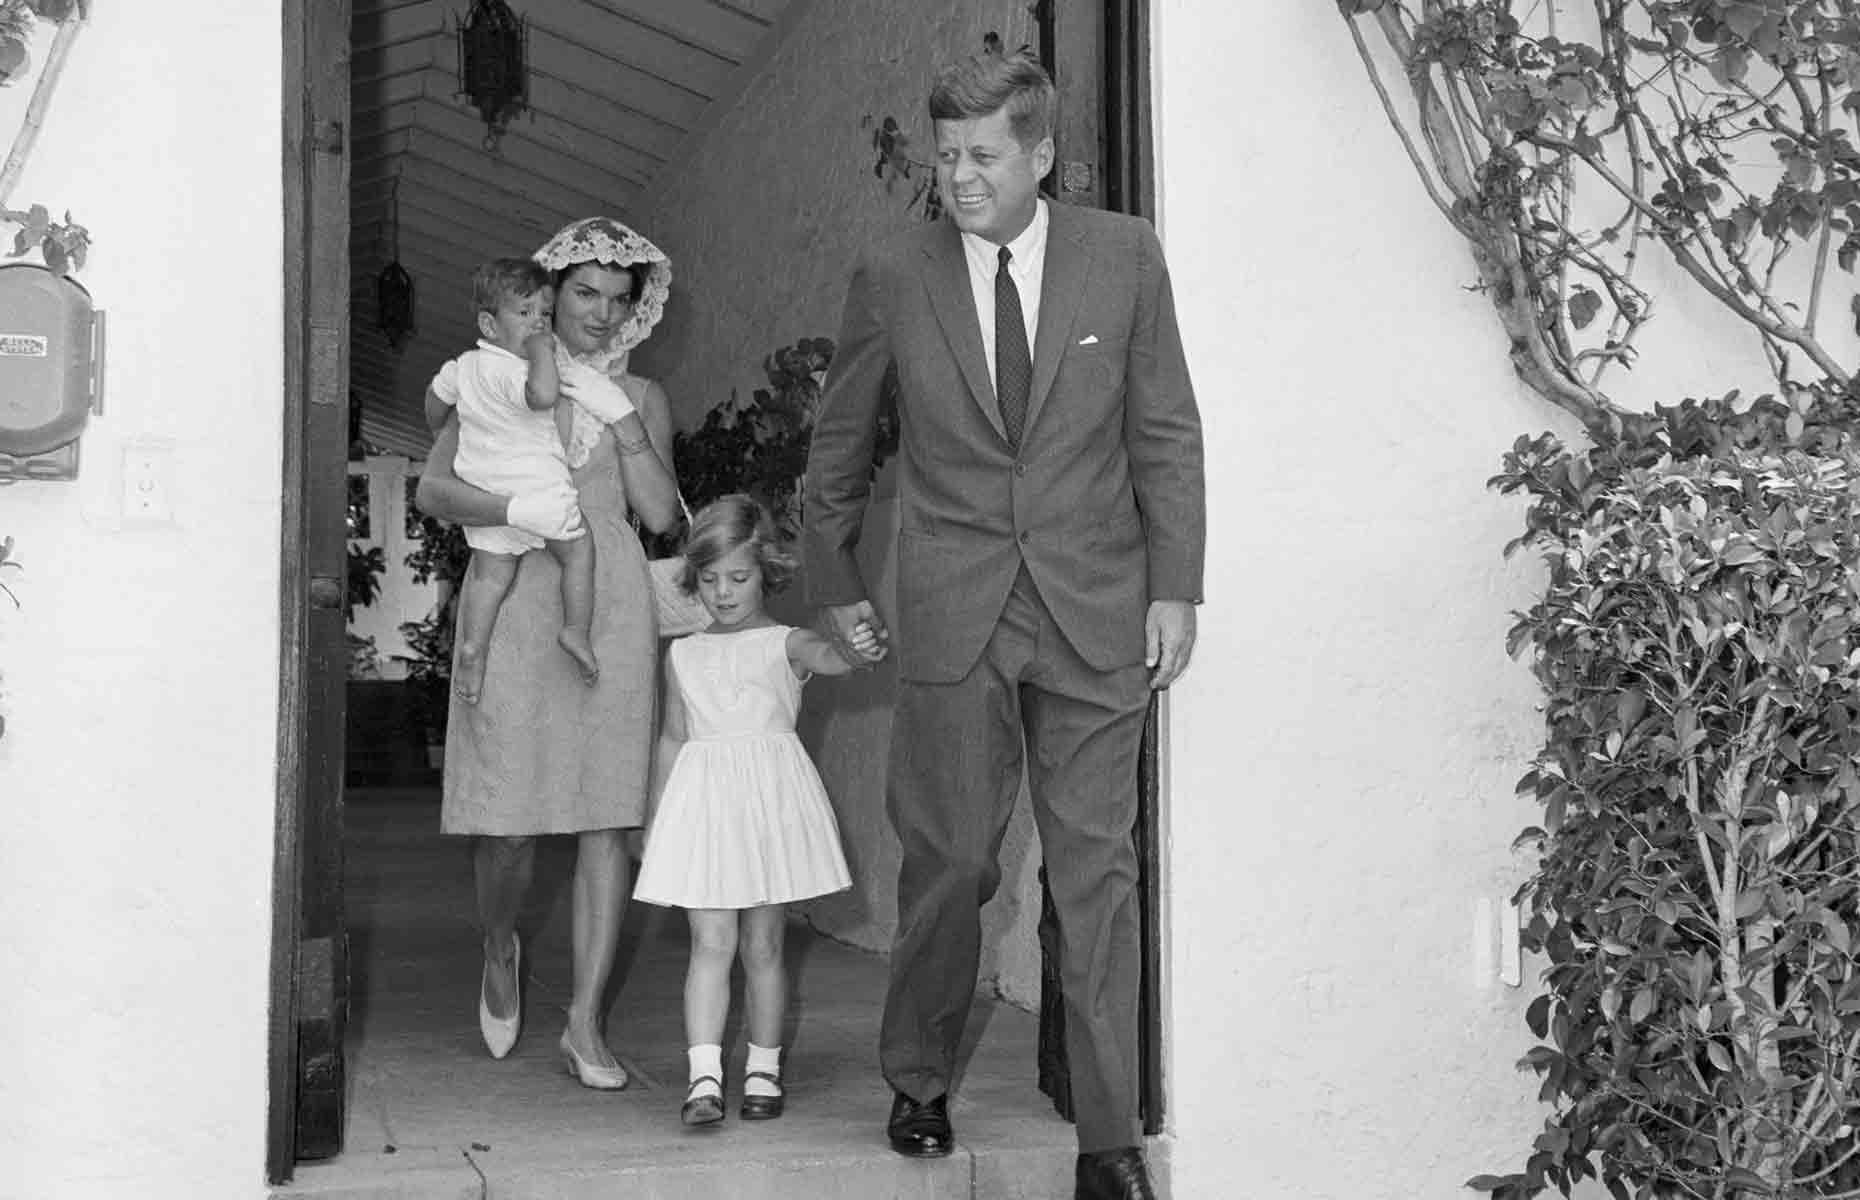 <p><a href="https://www.loveproperty.com/gallerylist/75715/from-the-kennedys-to-the-gettys-amazing-homes-of-the-worlds-most-famous-families">John F. Kennedy</a> was elected US president in November 1960, during one of the strained periods of the Cold War. With the threat of nuclear annihilation growing, officials must have been in a state of total panic when they realized the new POTUS had no means of protection from a Soviet strike at his vacation home in Palm Beach, Florida, which went on to be nicknamed the Winter White House. The former president is pictured here visiting the property with his wife, Jackie, and children, John, Jr. and Caroline.</p>